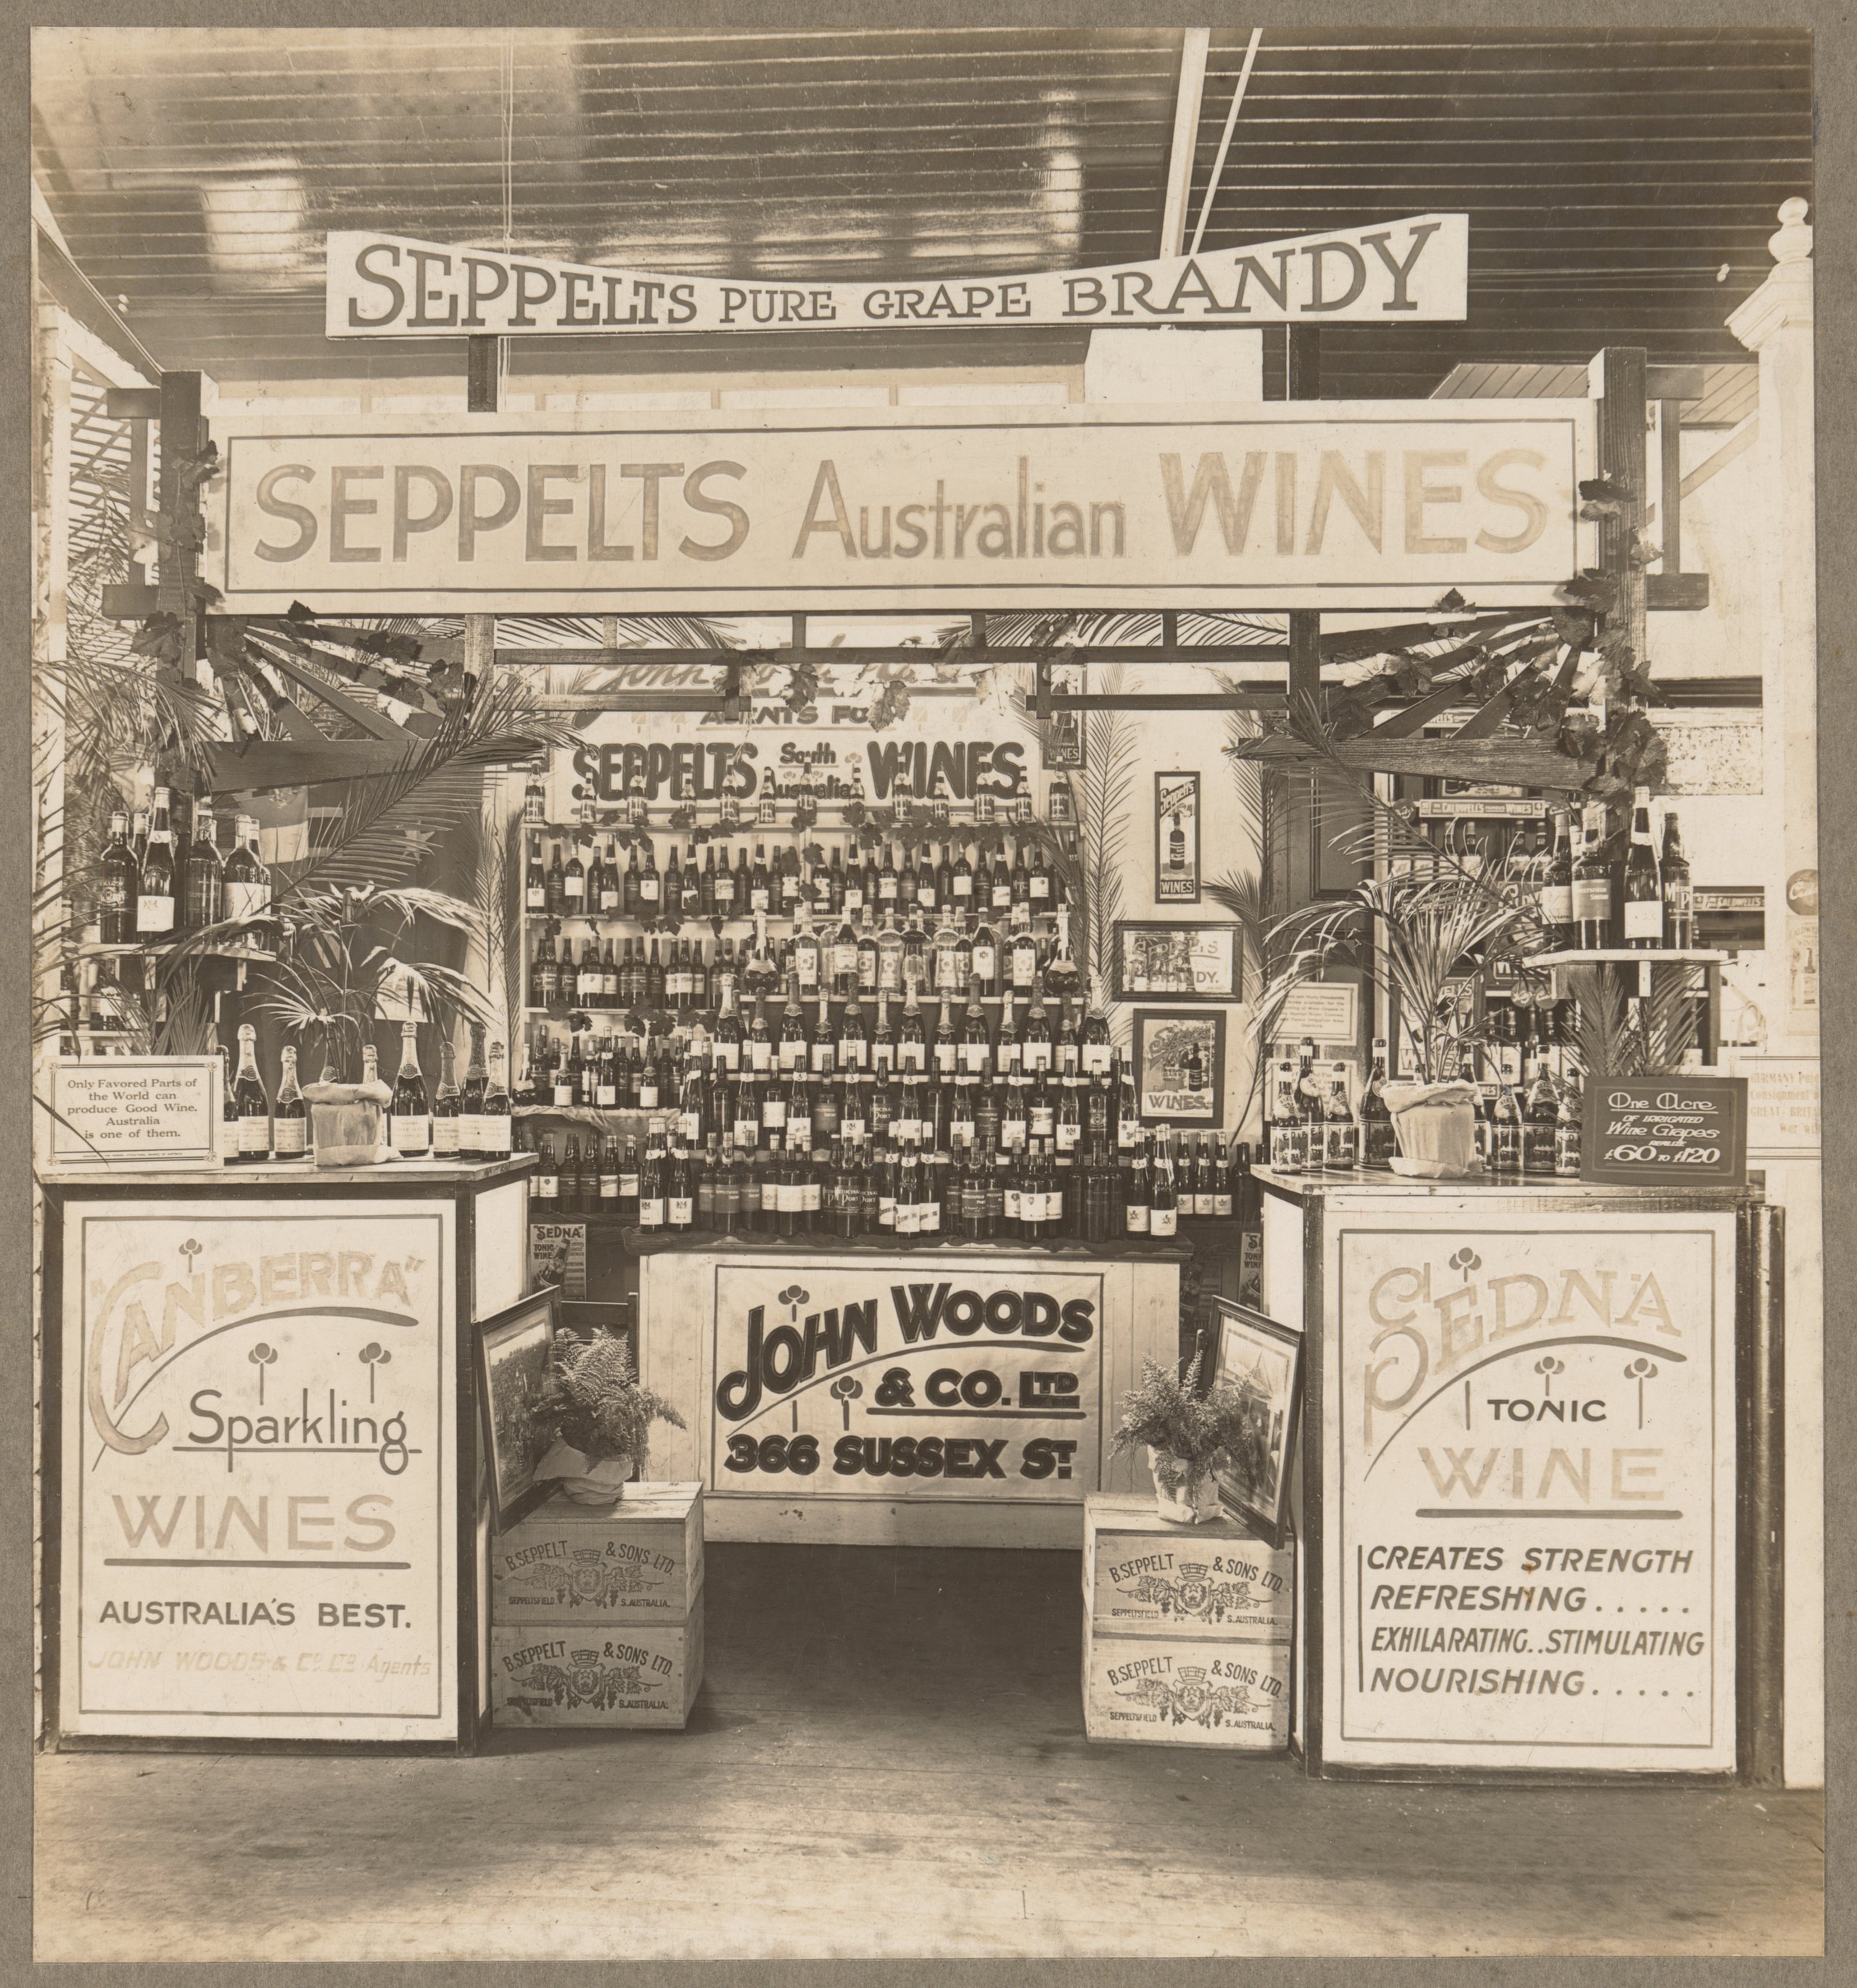 Photograph of promotional exhibit for The House of Seppelt at Sydney Royal Easter Show